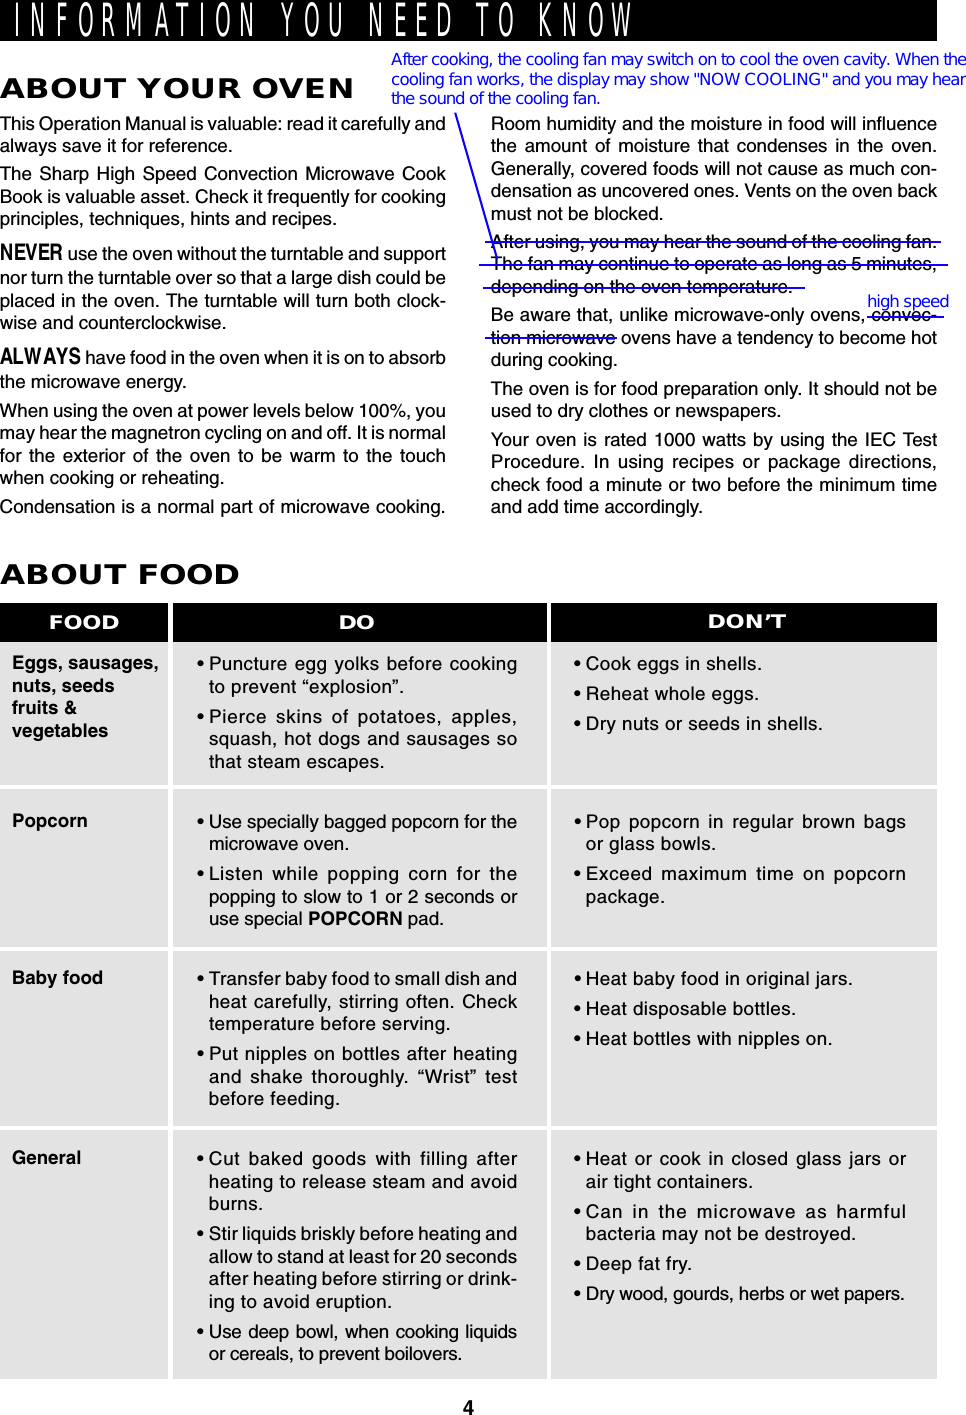 4INFORMATION YOU NEED TO KNOWABOUT YOUR OVENThis Operation Manual is valuable: read it carefully andalways save it for reference.The Sharp High Speed Convection Microwave CookBook is valuable asset. Check it frequently for cookingprinciples, techniques, hints and recipes.NEVER use the oven without the turntable and supportnor turn the turntable over so that a large dish could beplaced in the oven. The turntable will turn both clock-wise and counterclockwise.ALWAYS have food in the oven when it is on to absorbthe microwave energy.When using the oven at power levels below 100%, youmay hear the magnetron cycling on and off. It is normalfor the exterior of the oven to be warm to the touchwhen cooking or reheating.Condensation is a normal part of microwave cooking.Room humidity and the moisture in food will influencethe amount of moisture that condenses in the oven.Generally, covered foods will not cause as much con-densation as uncovered ones. Vents on the oven backmust not be blocked.After using, you may hear the sound of the cooling fan.The fan may continue to operate as long as 5 minutes,depending on the oven temperature.Be aware that, unlike microwave-only ovens, convec-tion microwave ovens have a tendency to become hotduring cooking.The oven is for food preparation only. It should not beused to dry clothes or newspapers.Your oven is rated 1000 watts by using the IEC TestProcedure. In using recipes or package directions,check food a minute or two before the minimum timeand add time accordingly.Eggs, sausages,nuts, seedsfruits &amp;vegetablesPopcornBaby foodGeneralABOUT FOOD•Puncture egg yolks before cookingto prevent “explosion”.•Pierce skins of potatoes, apples,squash, hot dogs and sausages sothat steam escapes.• Use specially bagged popcorn for themicrowave oven.•Listen while popping corn for thepopping to slow to 1 or 2 seconds oruse special POPCORN pad.•Transfer baby food to small dish andheat carefully, stirring often. Checktemperature before serving.•Put nipples on bottles after heatingand shake thoroughly. “Wrist” testbefore feeding.•Cut baked goods with filling afterheating to release steam and avoidburns.•Stir liquids briskly before heating andallow to stand at least for 20 secondsafter heating before stirring or drink-ing to avoid eruption.•Use deep bowl, when cooking liquidsor cereals, to prevent boilovers.•Cook eggs in shells.•Reheat whole eggs.•Dry nuts or seeds in shells.•Pop popcorn in regular brown bagsor glass bowls.•Exceed maximum time on popcornpackage.•Heat baby food in original jars.•Heat disposable bottles.•Heat bottles with nipples on.•Heat or cook in closed glass jars orair tight containers.•Can in the microwave as harmfulbacteria may not be destroyed.•Deep fat fry.•Dry wood, gourds, herbs or wet papers.DO DON’TFOODAfter cooking, the cooling fan may switch on to cool the oven cavity. When thecooling fan works, the display may show &quot;NOW COOLING&quot; and you may hearthe sound of the cooling fan.high speed